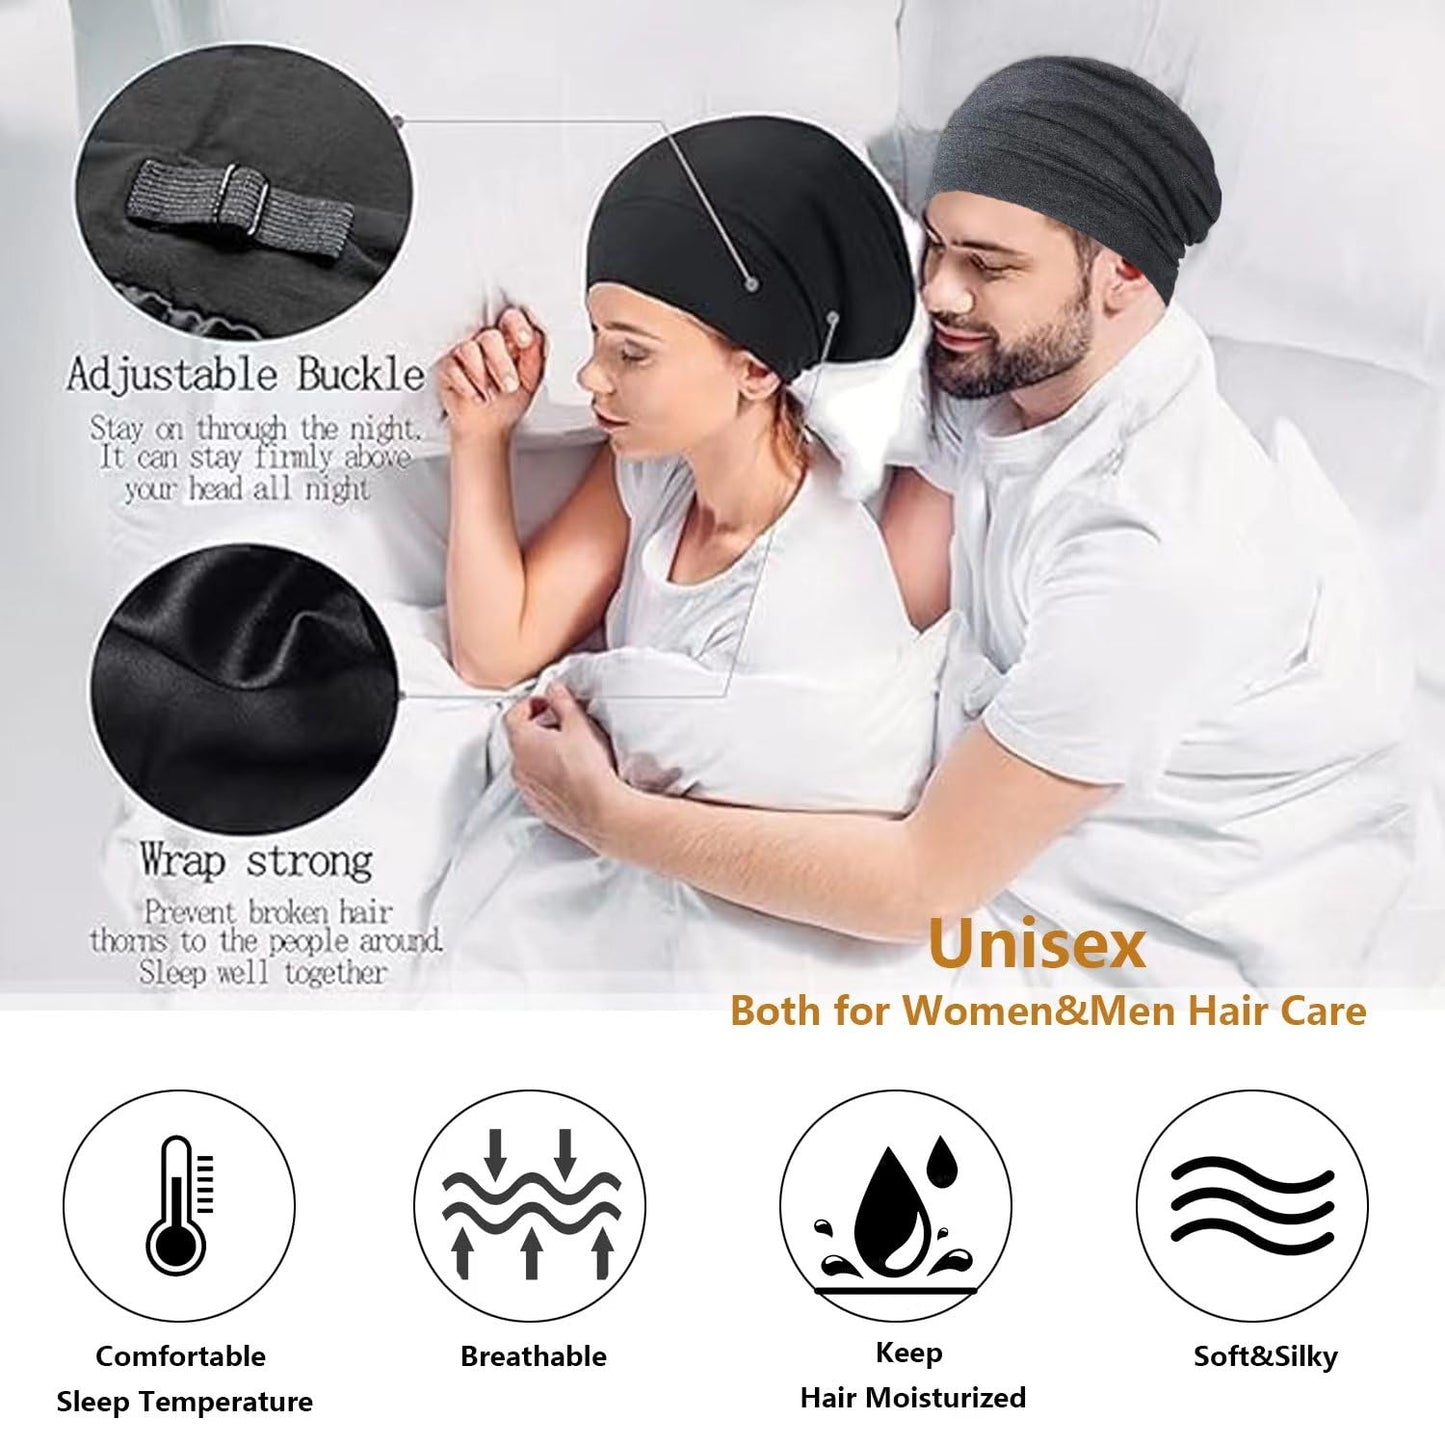 Satin Bonnet Silk Lined Sleep Cap- Adjustable Hair Cover for Women Men Frizzy Hair Night Cap Patients Care